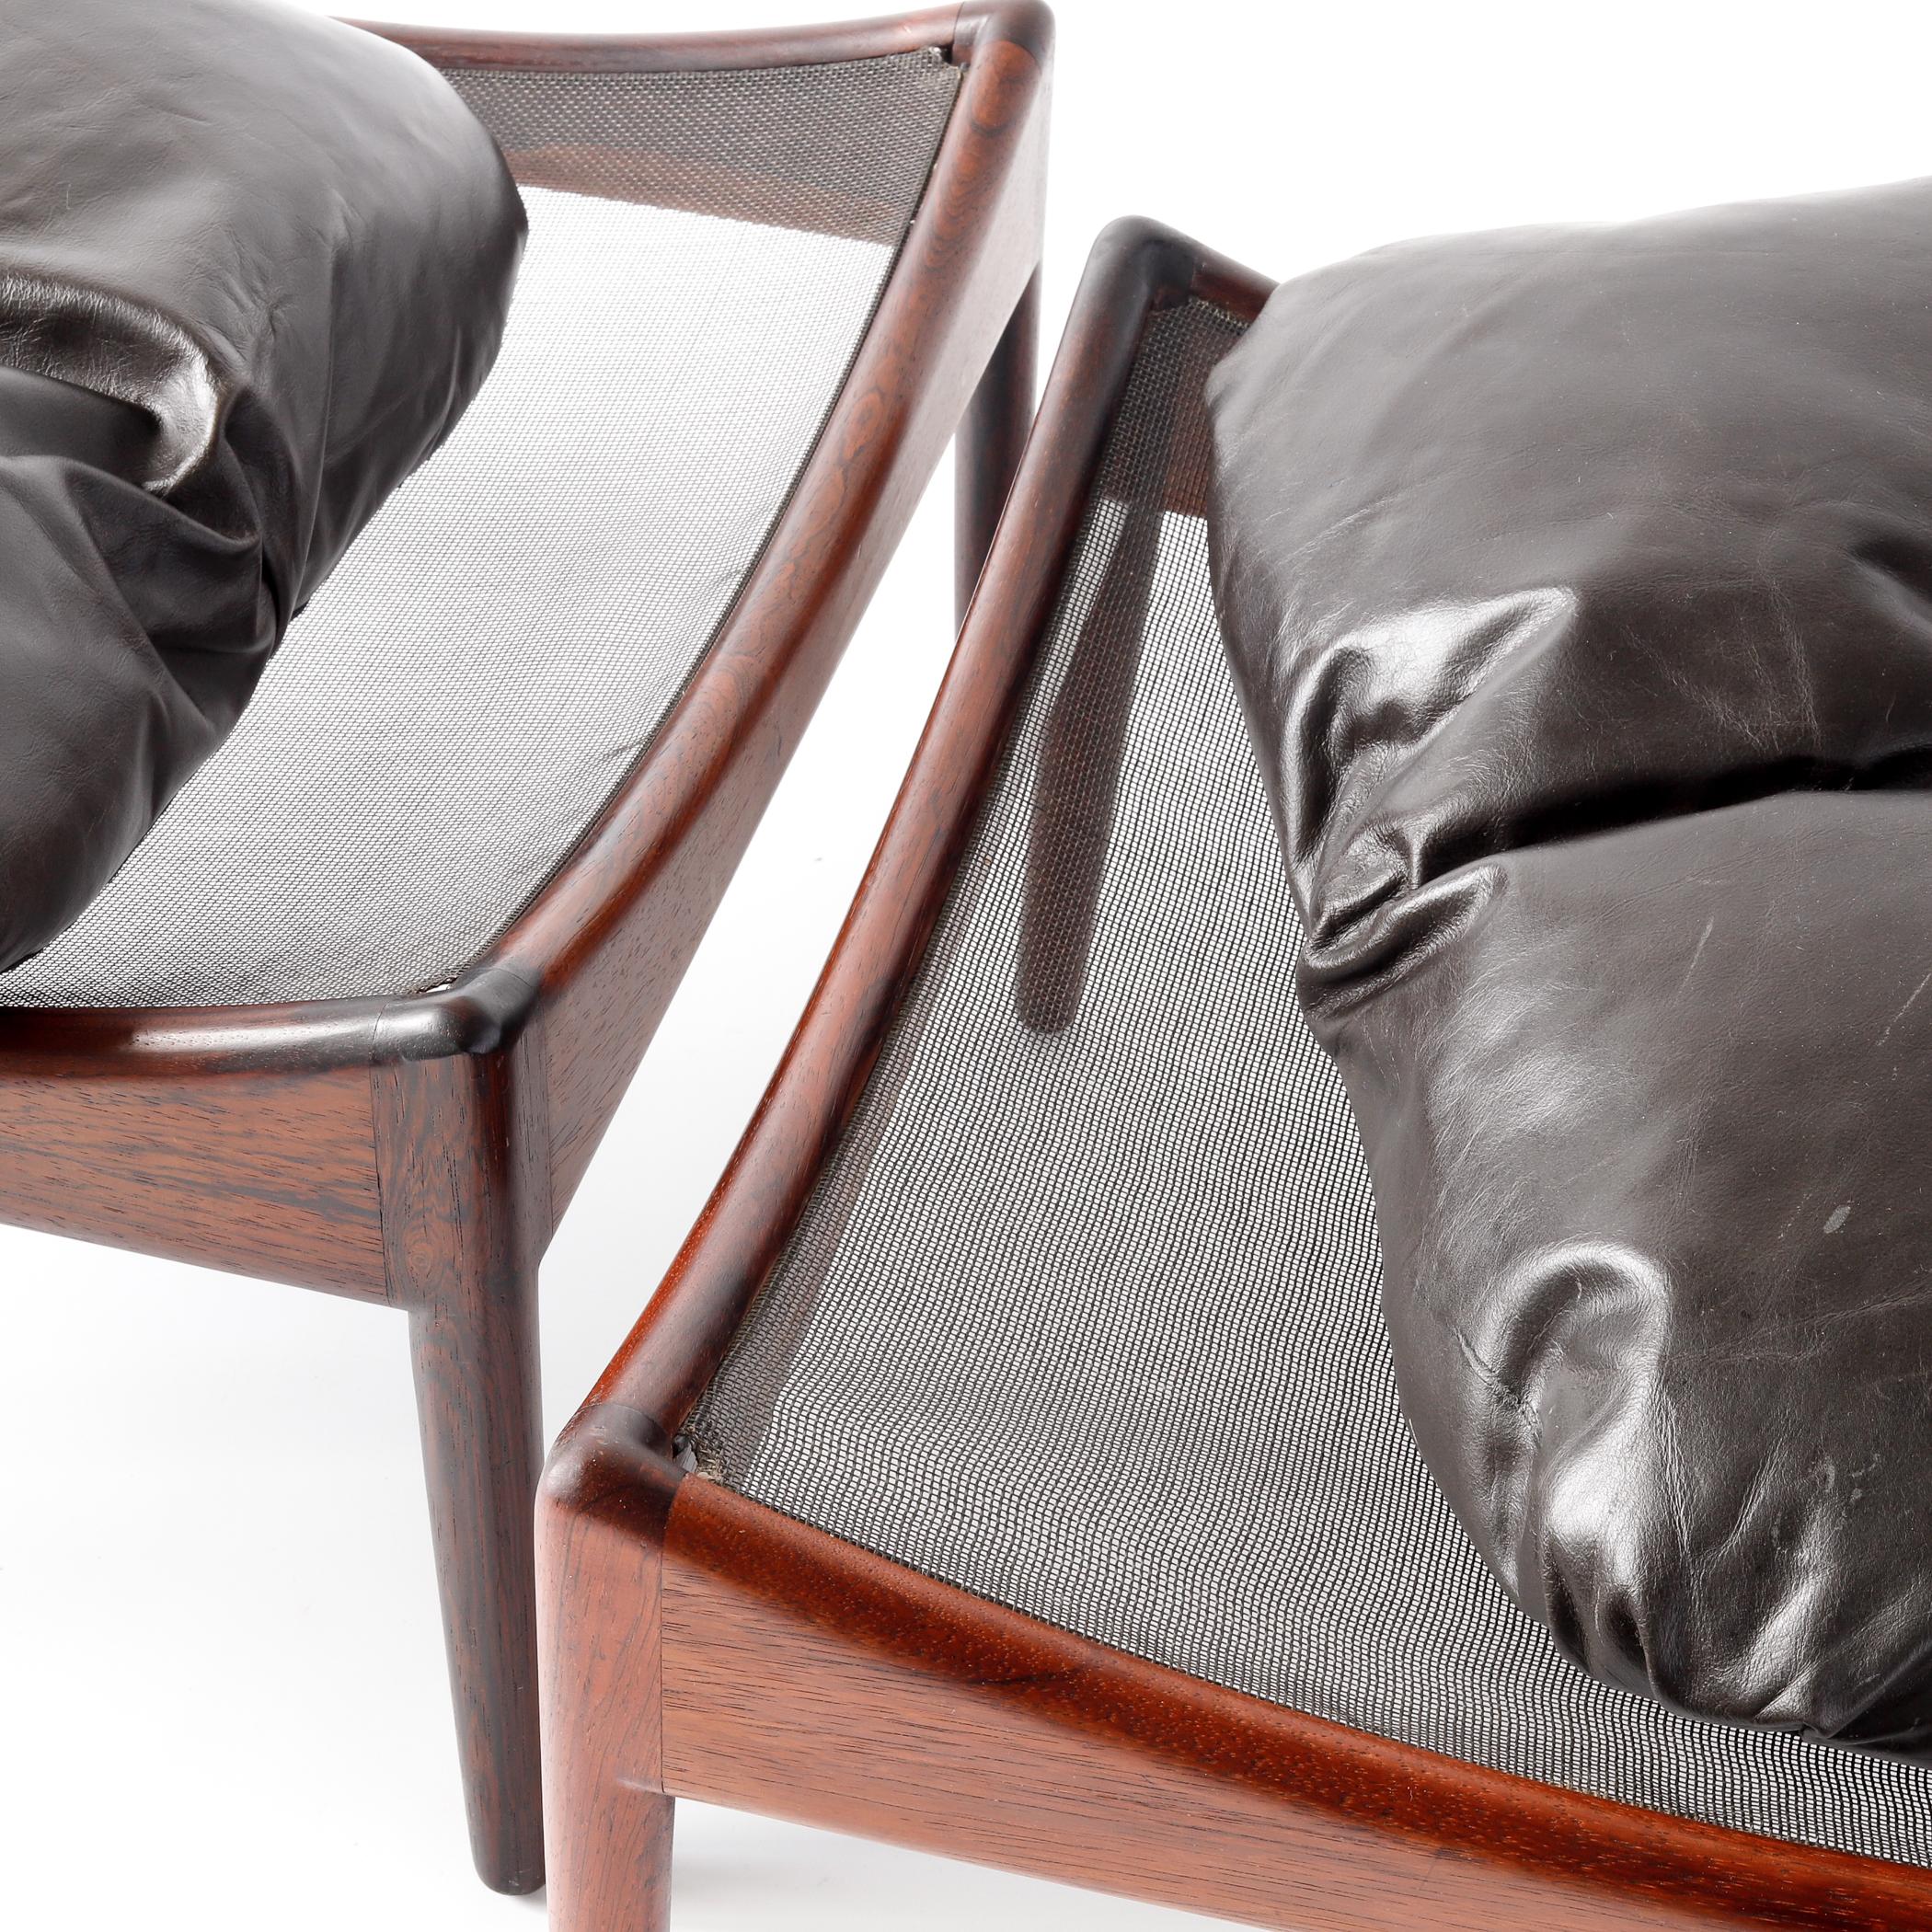 Pair of Kristian Vedel Rosewood Modus Ottomans with Brown Leather Upholstery  (Mitte des 20. Jahrhunderts) im Angebot